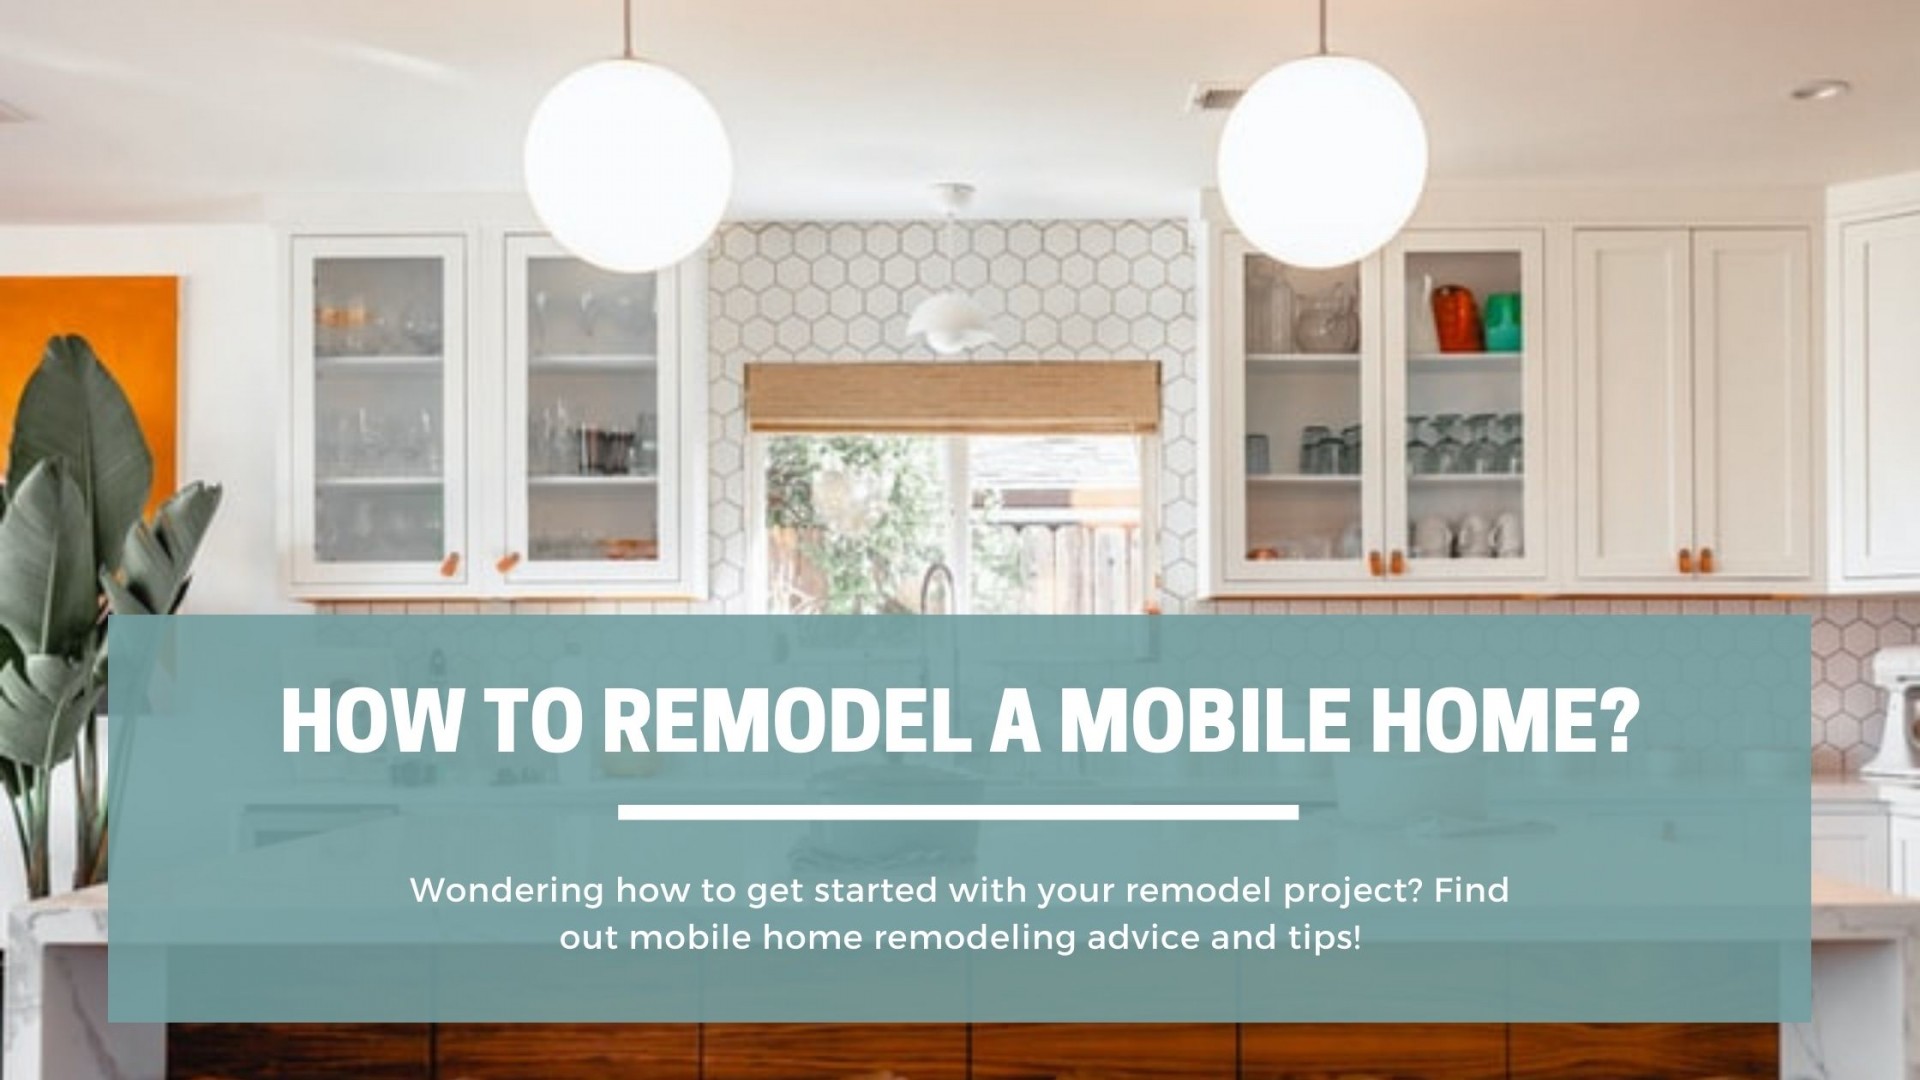 How to Remodel a Mobile Home: kitchen, bathroom, exterior ideas | Homes  Direct | Homes Direct